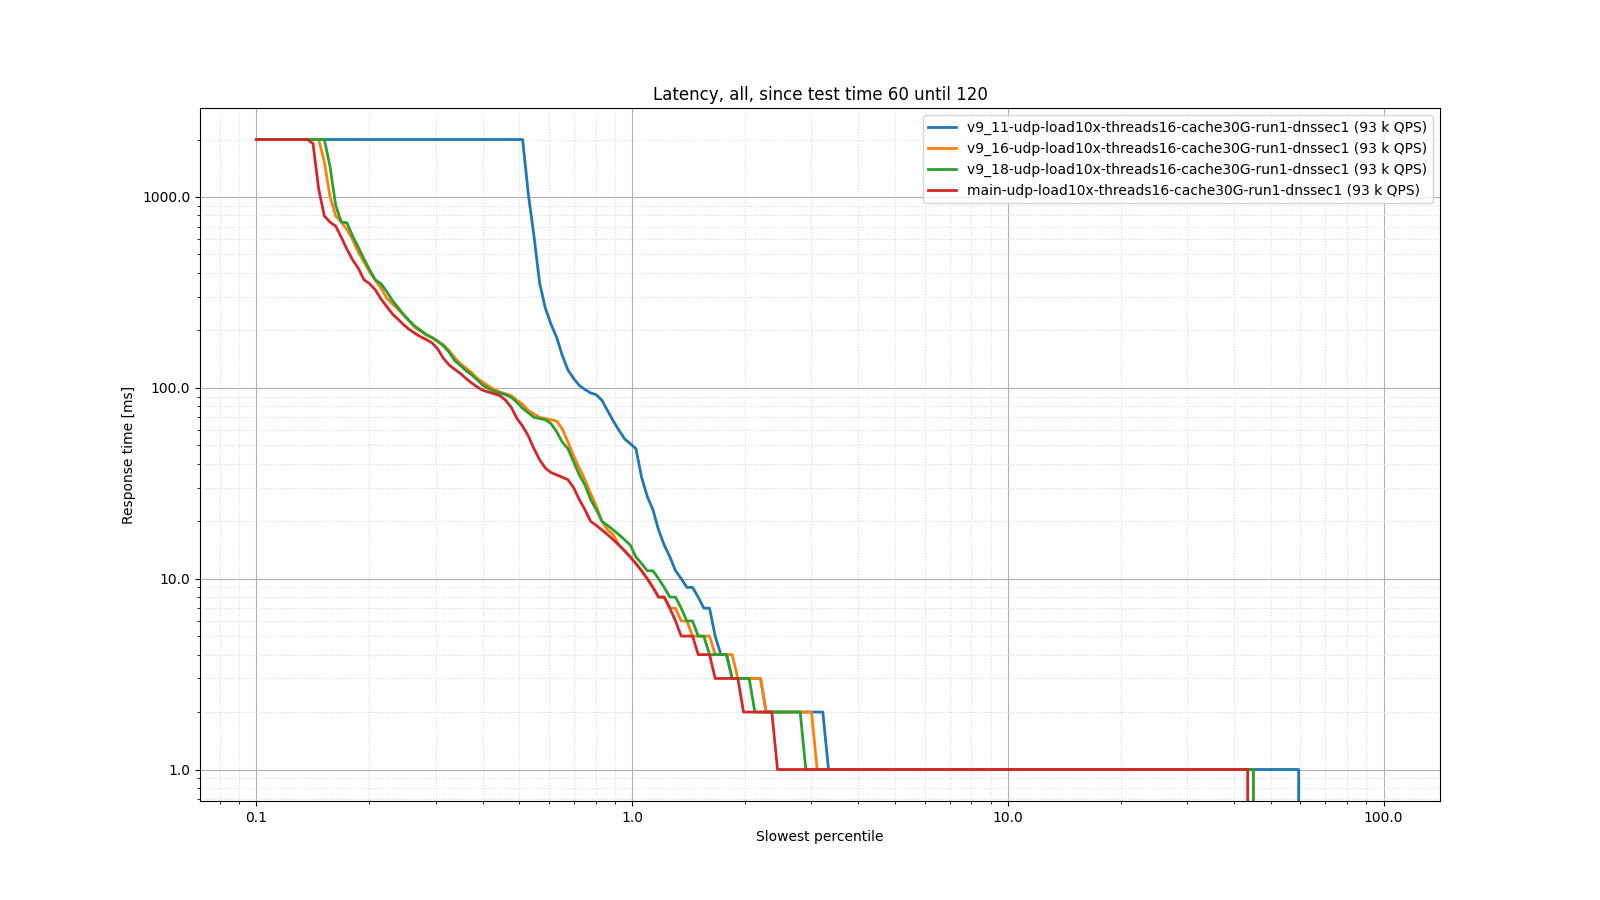 Resolver query response time shown in a logarithmic percentile histogram, comparing recent versions of BIND 9.11, 9.16, 9.18 and 9.19 performance during the second 60 seconds of operation (warmer cache).